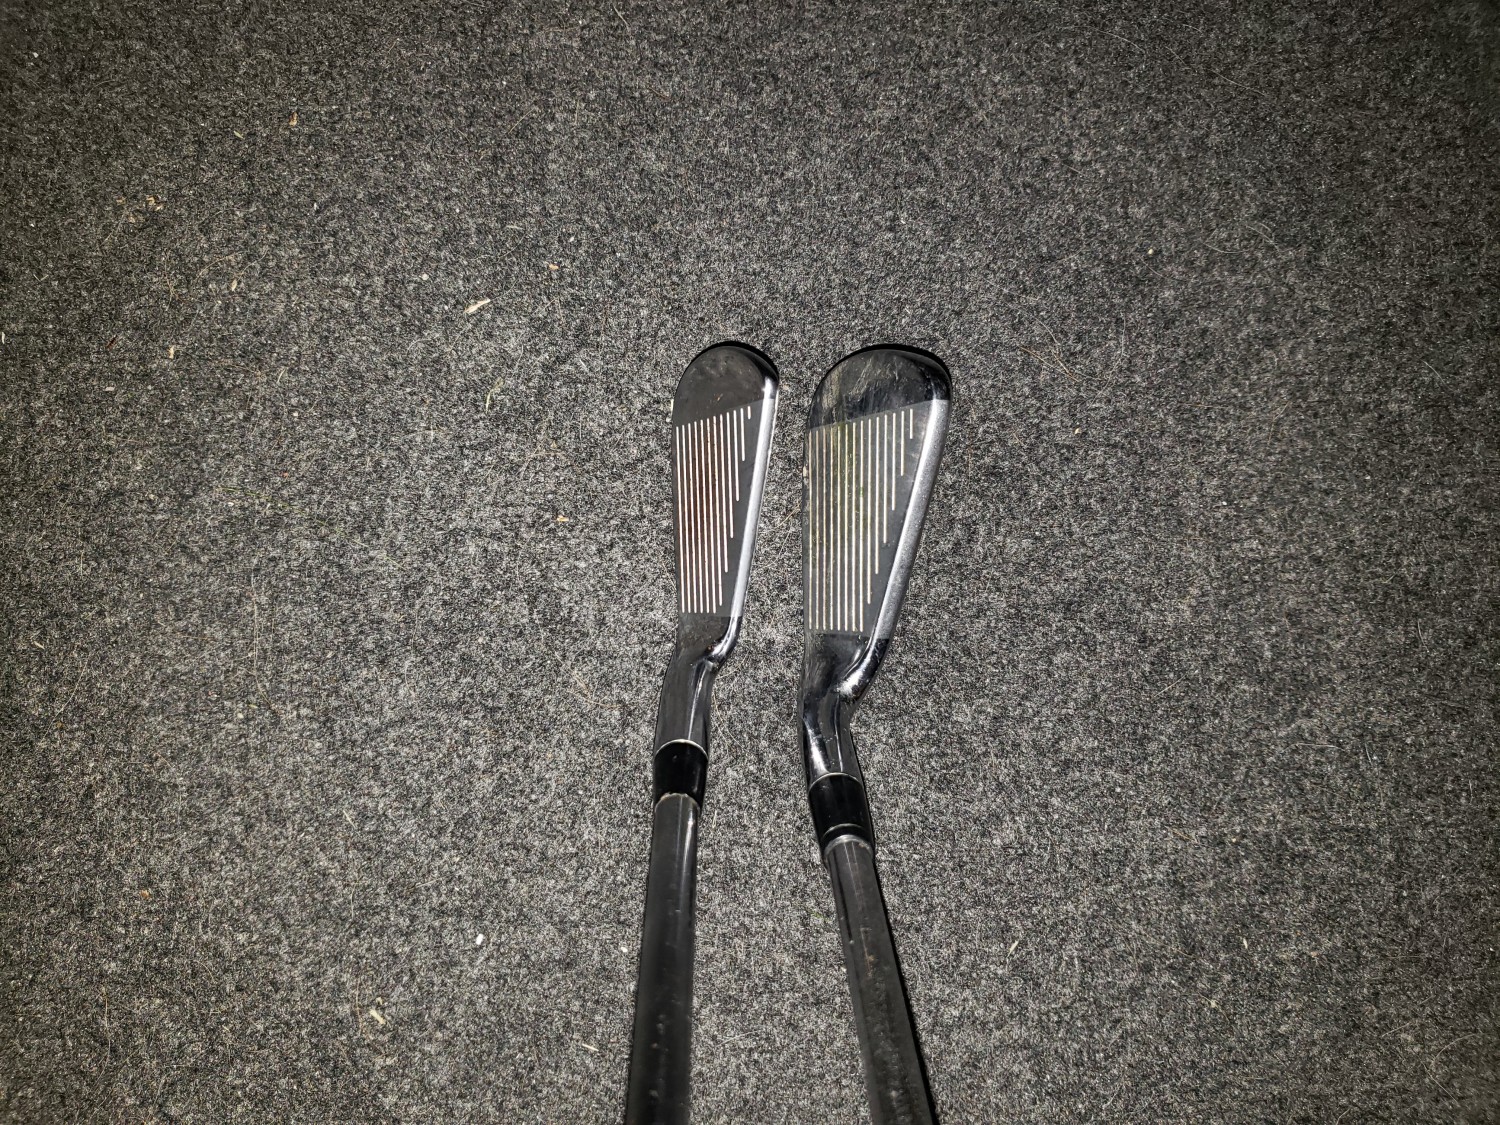 Decoratief kijken mooi zo MP-33 Review 19 years to late - Unofficial Reviews - MyGolfSpy Forum